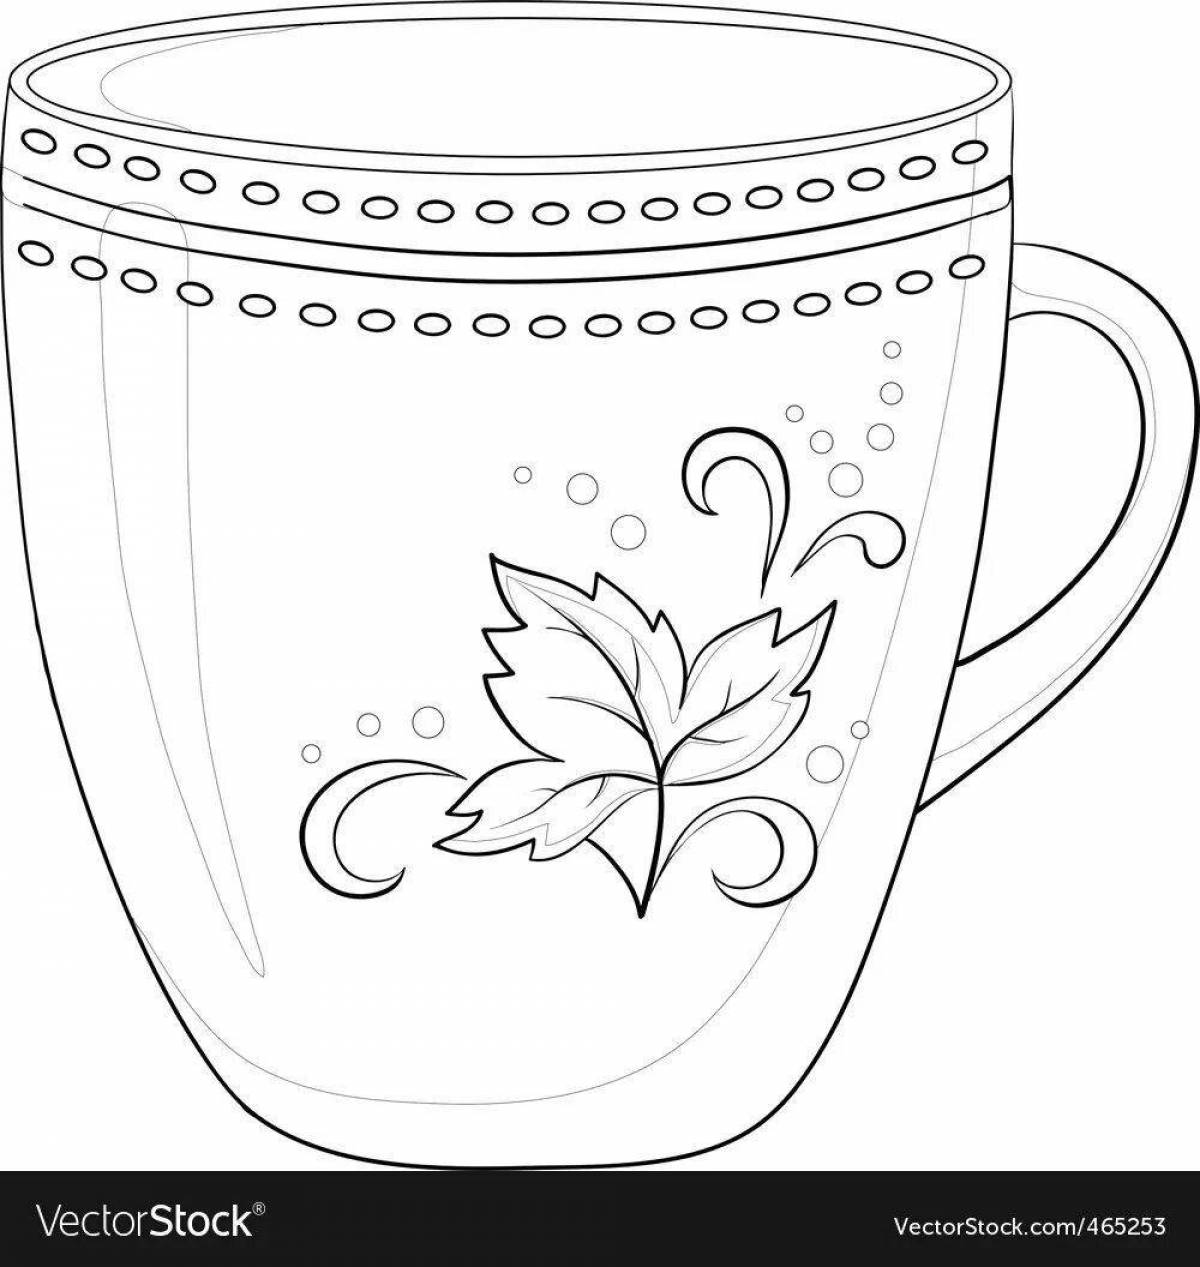 Gzhel amazing cup coloring page